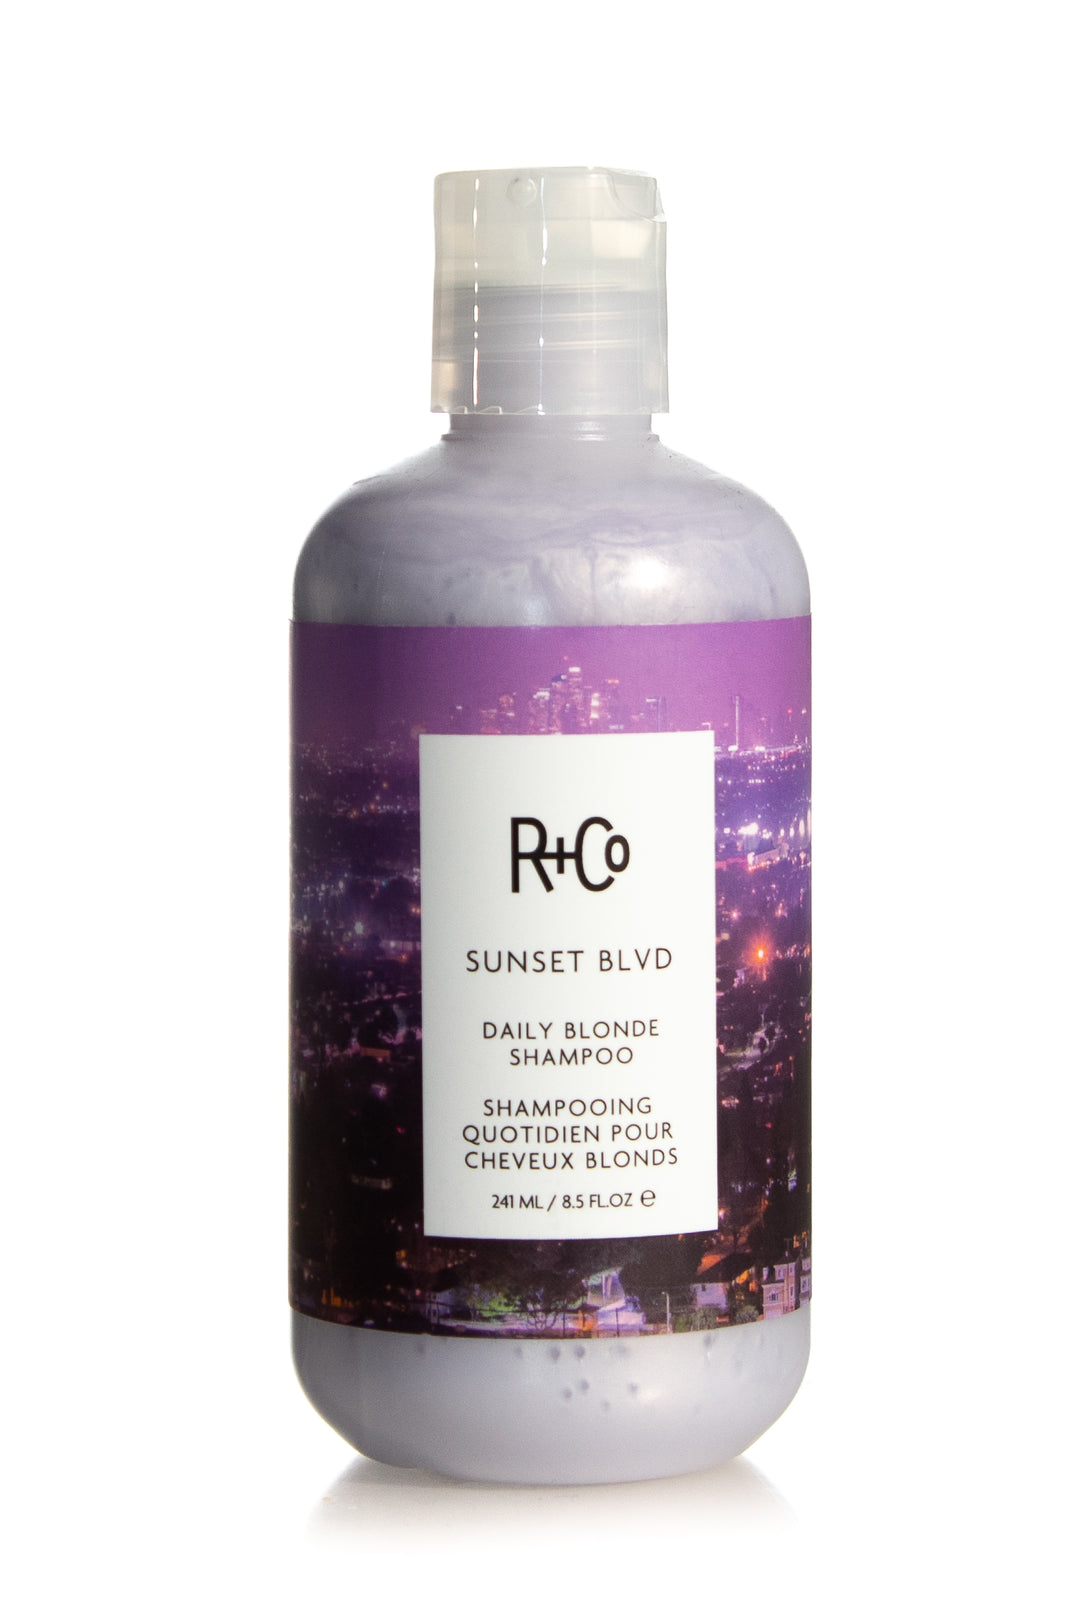 R+Co daily blonde shampoo Perfect for daily brightening, repairing and hydrating blonde + gray hair.